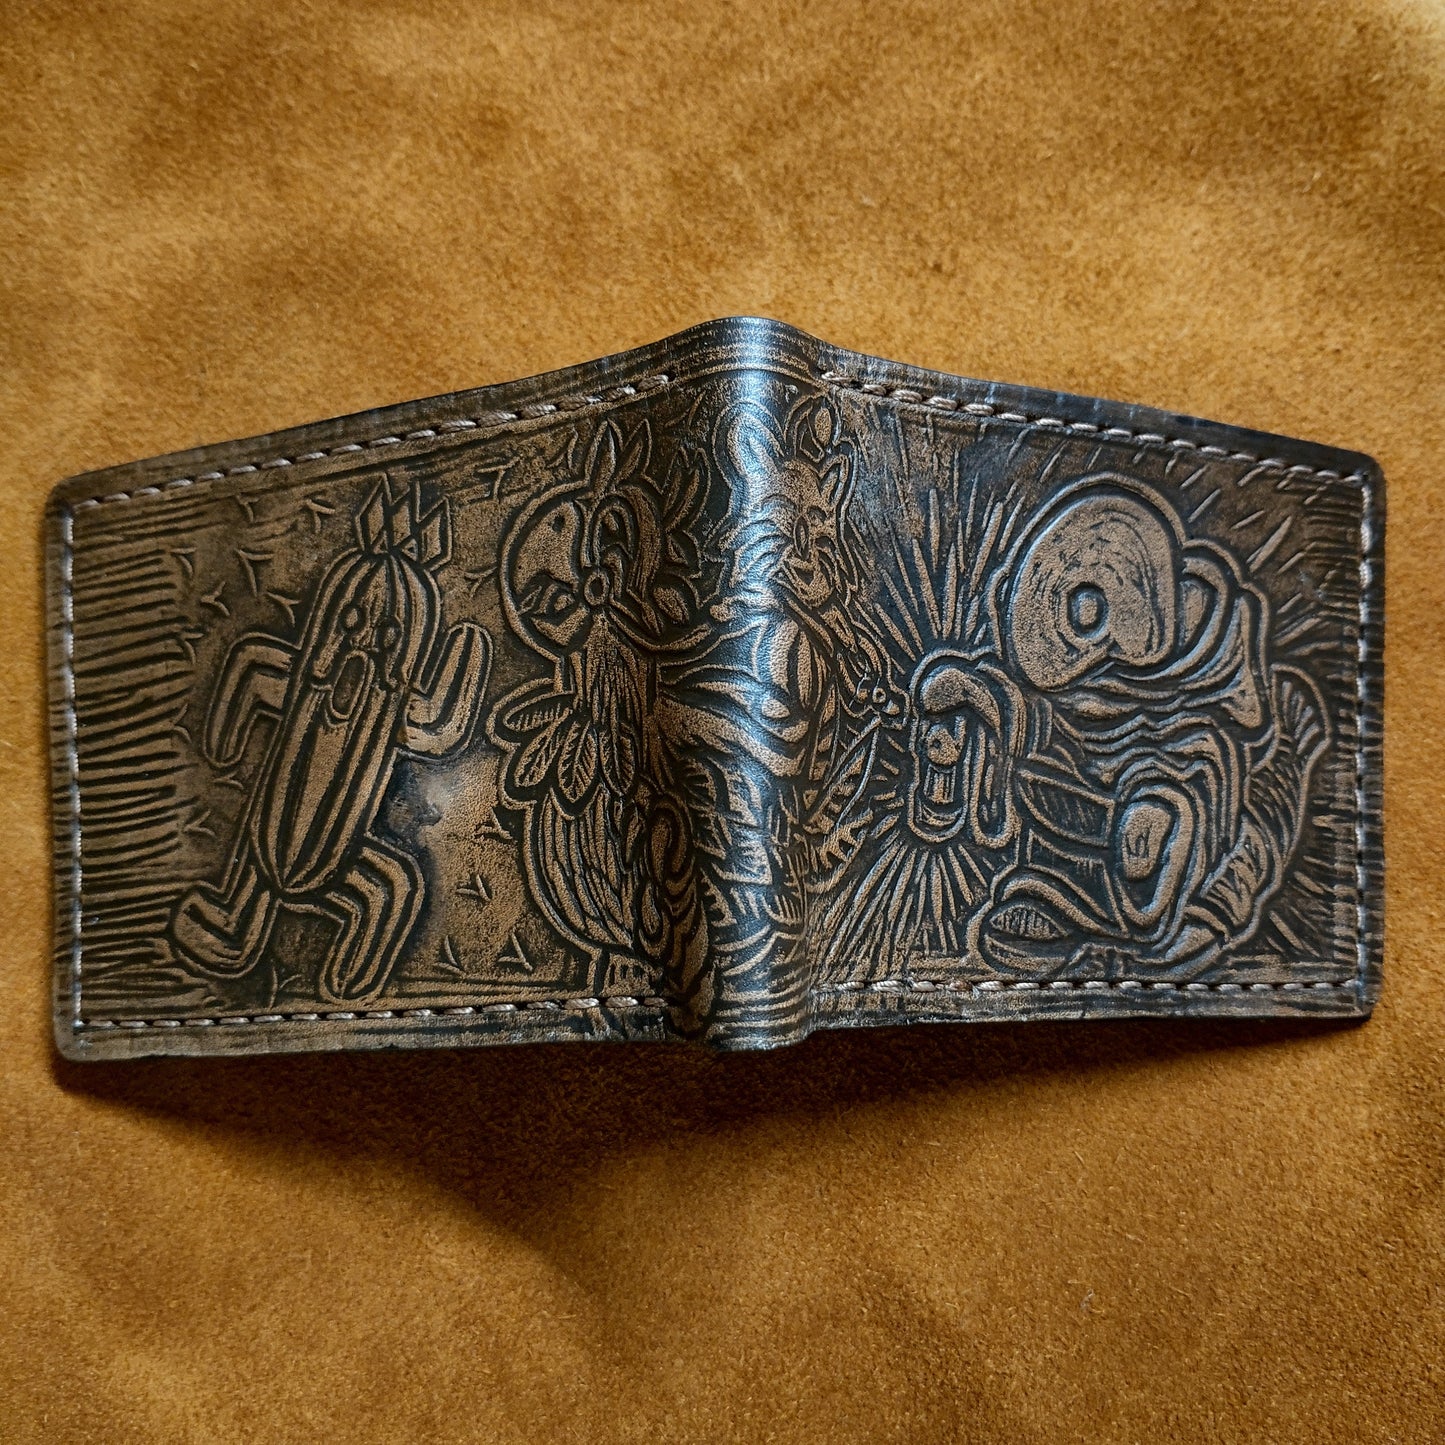 Textured - Cactuar - Chocobo and Tonberry - dark brown Leather Bifold Wallet - Handcrafted Final Fantasy 14 inspired Wallet -